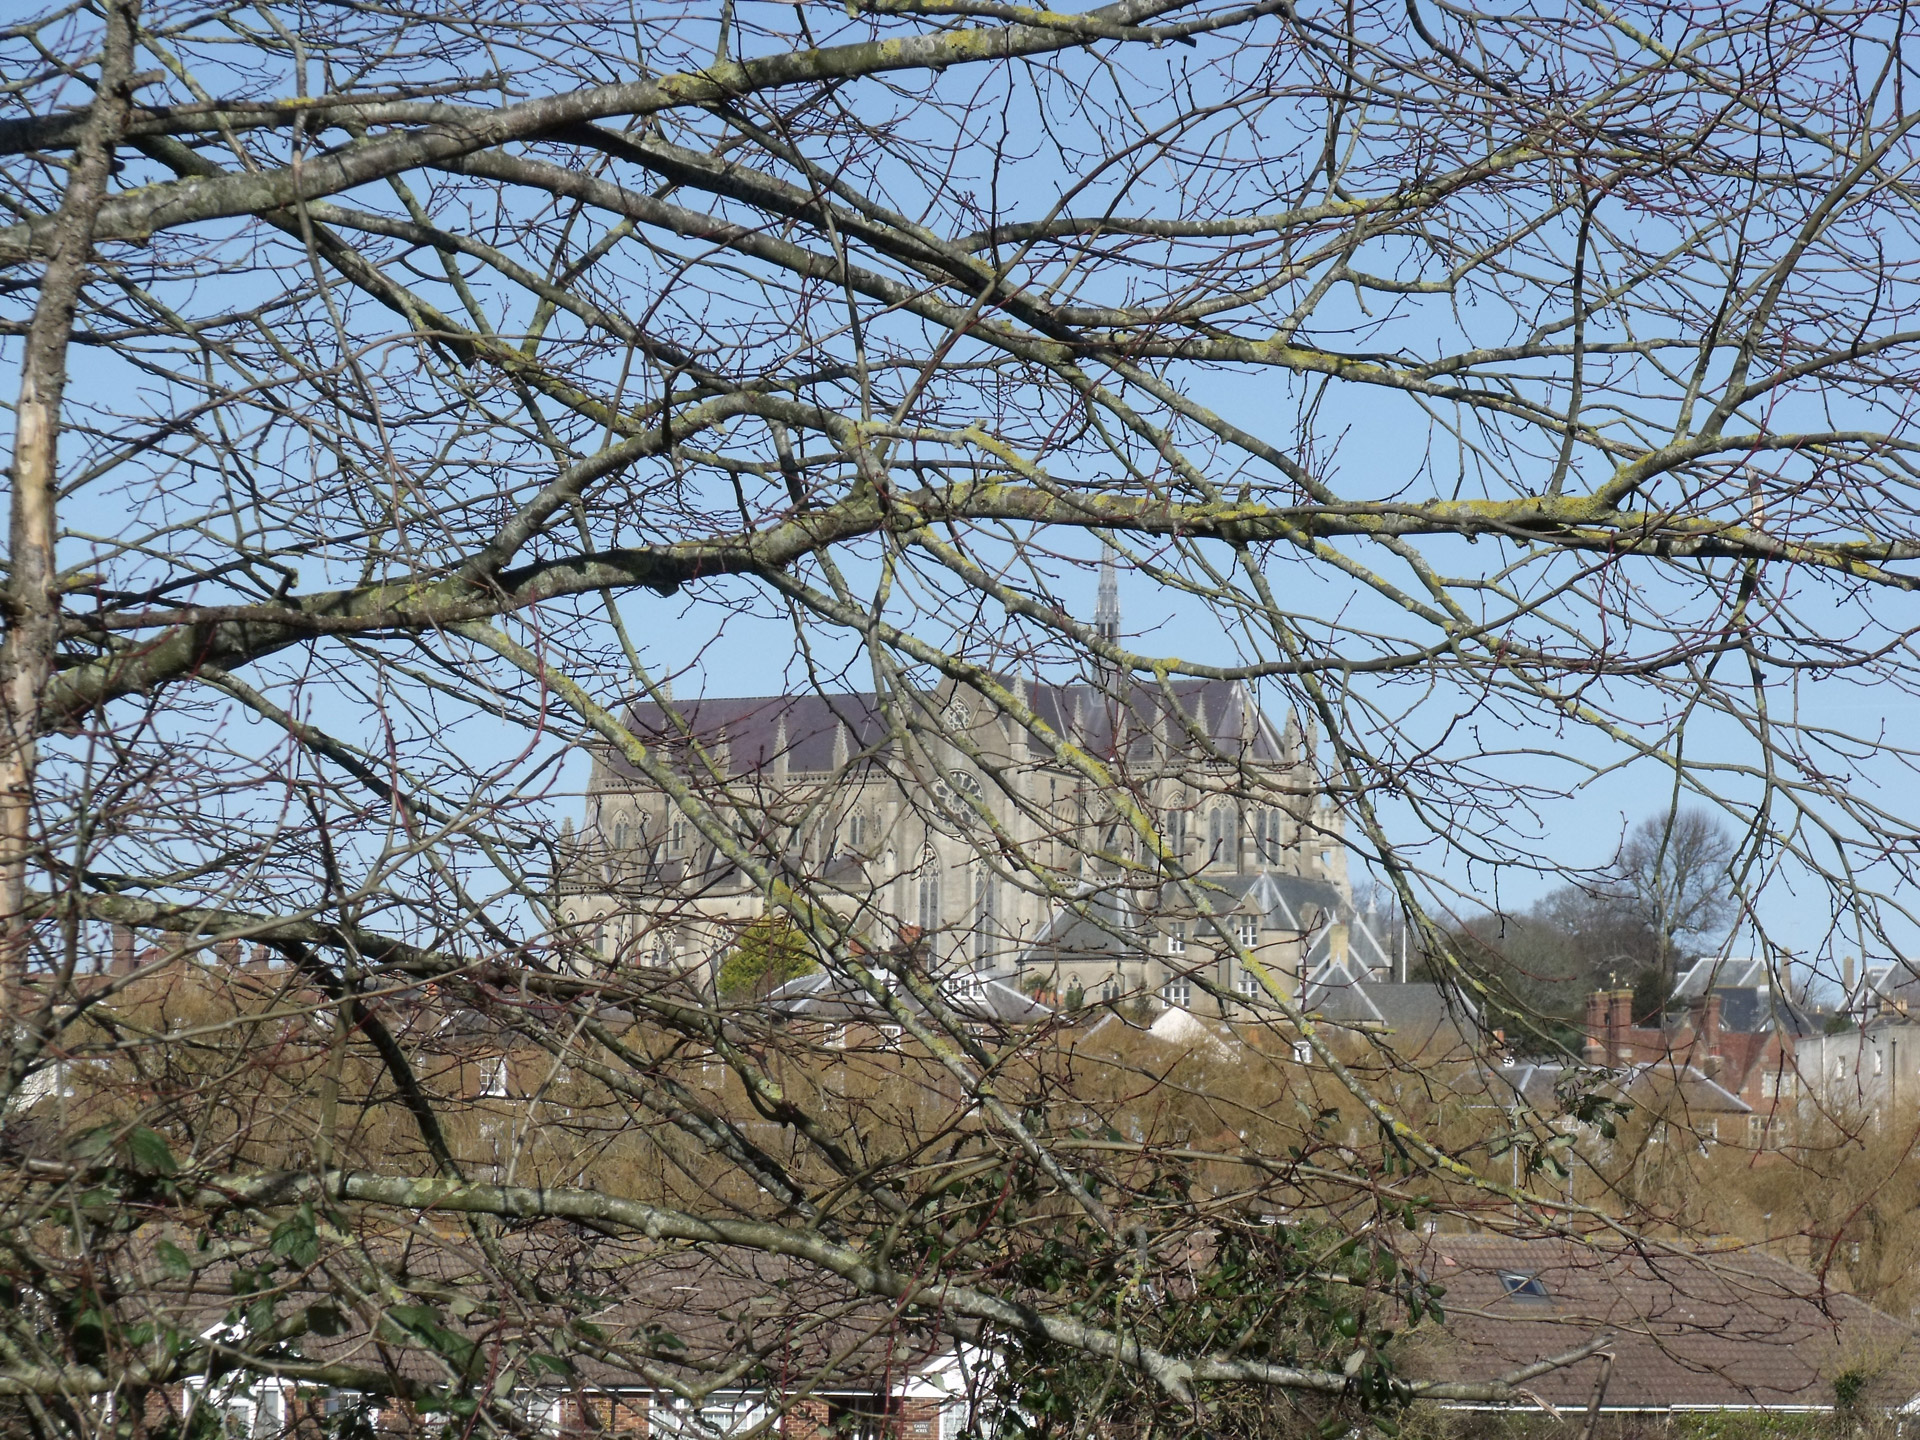 arundel cathedral church cathedral free photo